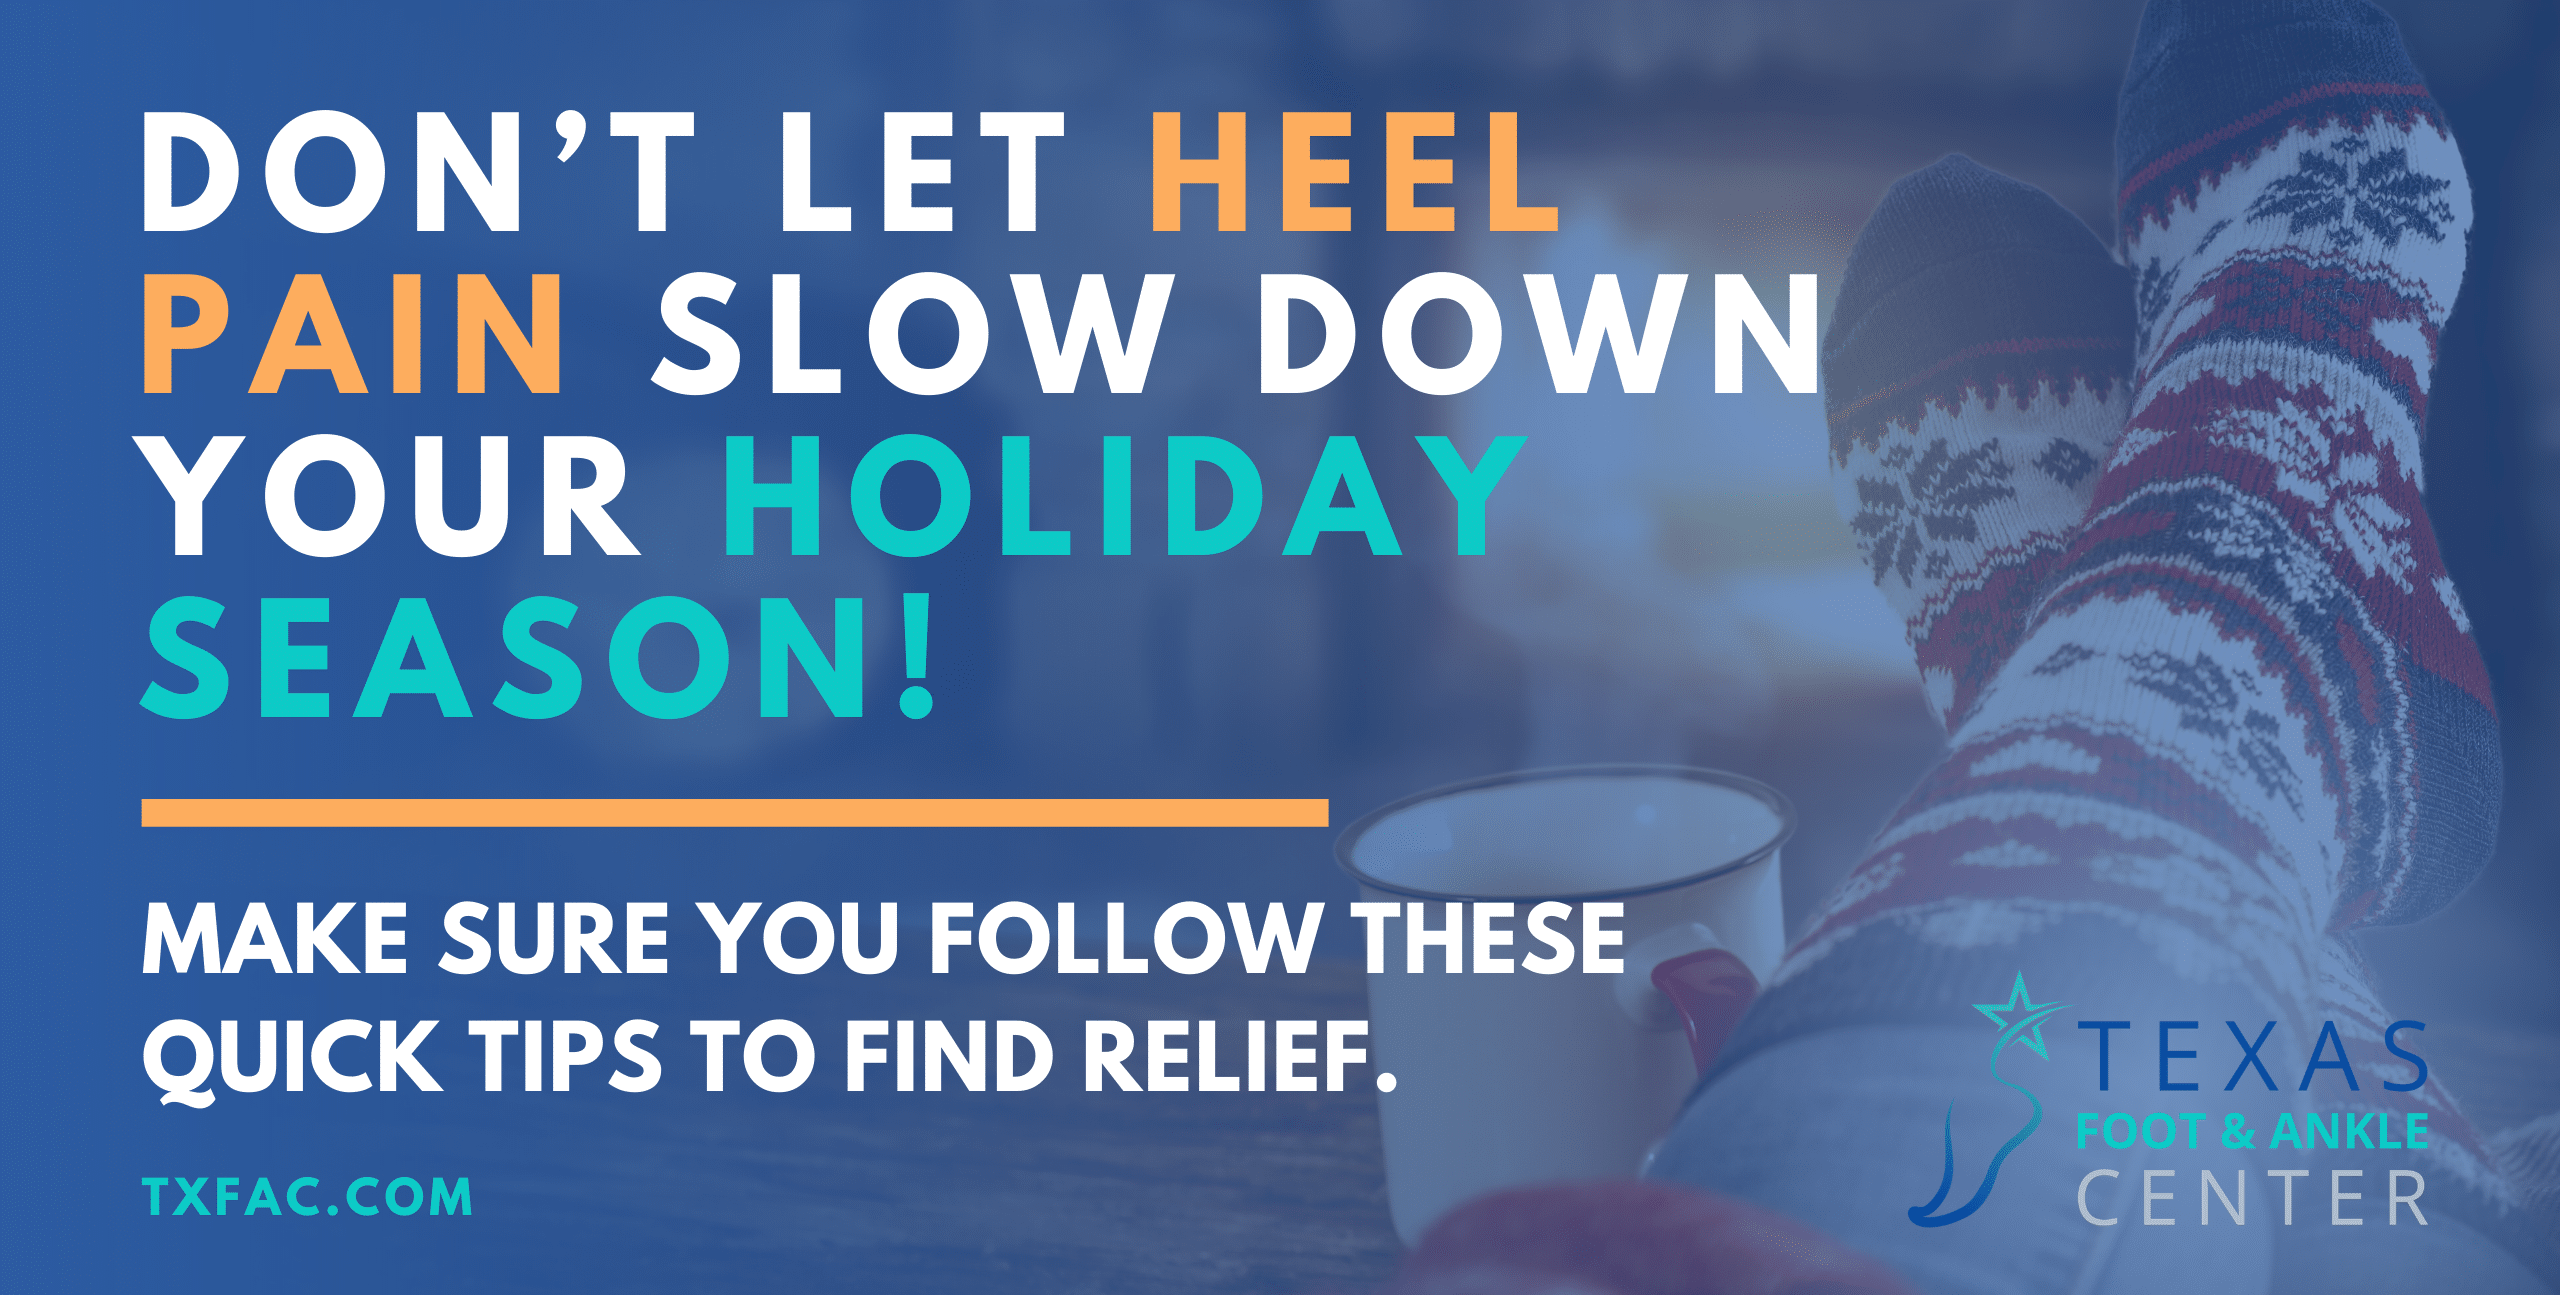 Don't let heel pain slow down your holiday season!